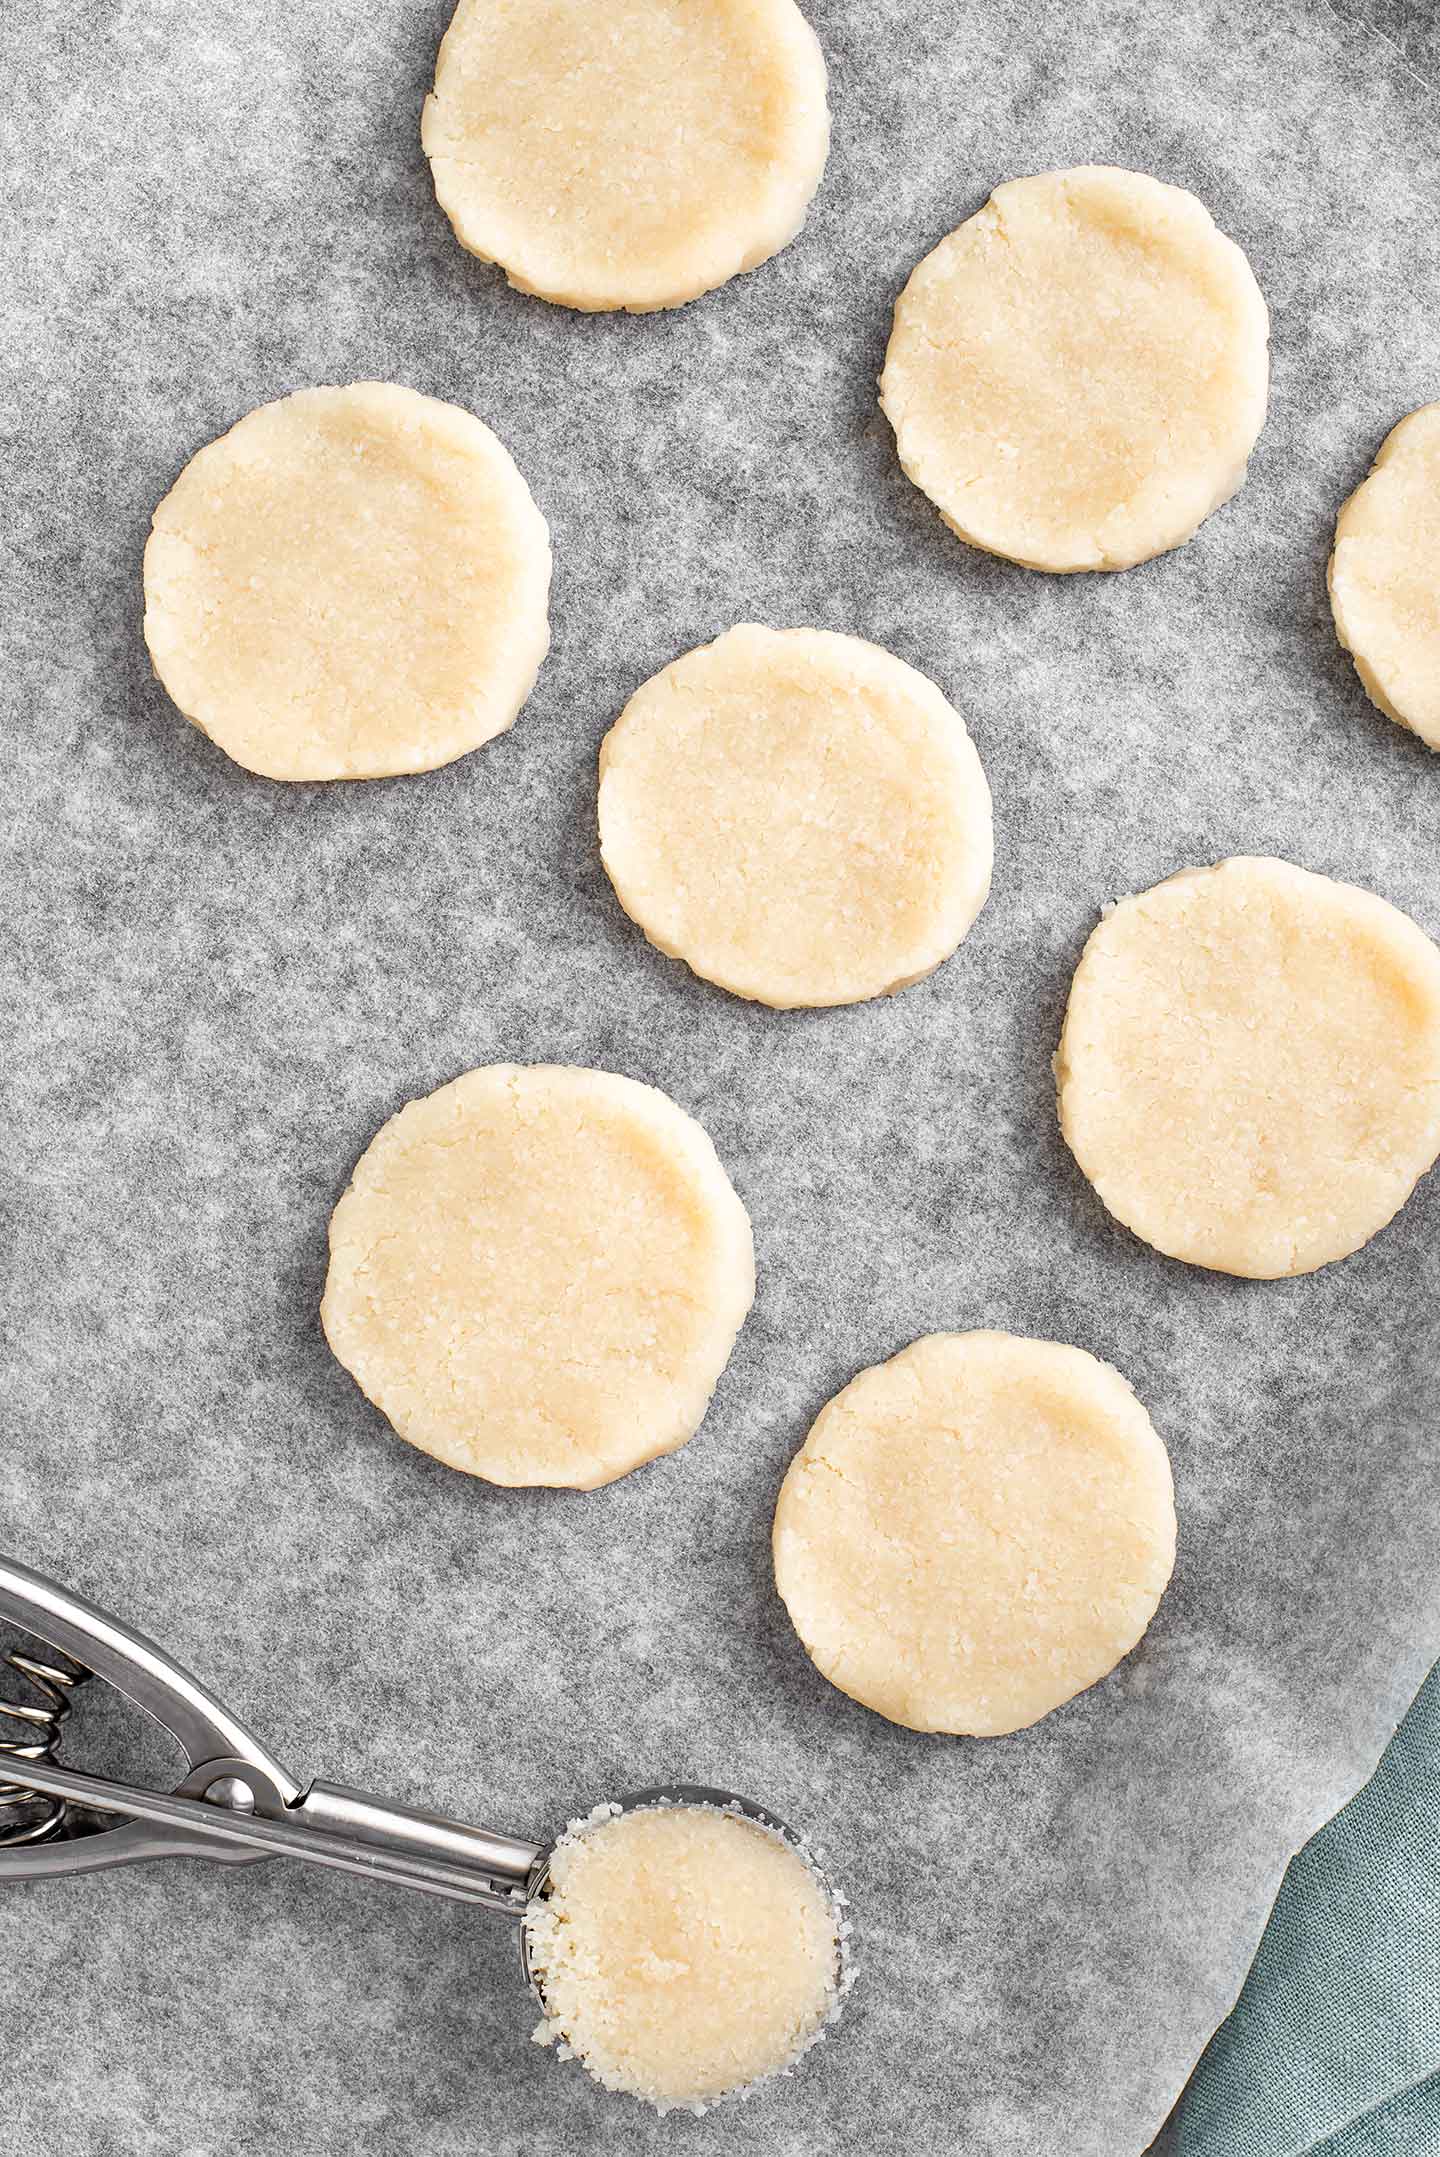 Top down view of the dough formed into rounds on a baking tray. A cookie scoop is full of more packed dough.